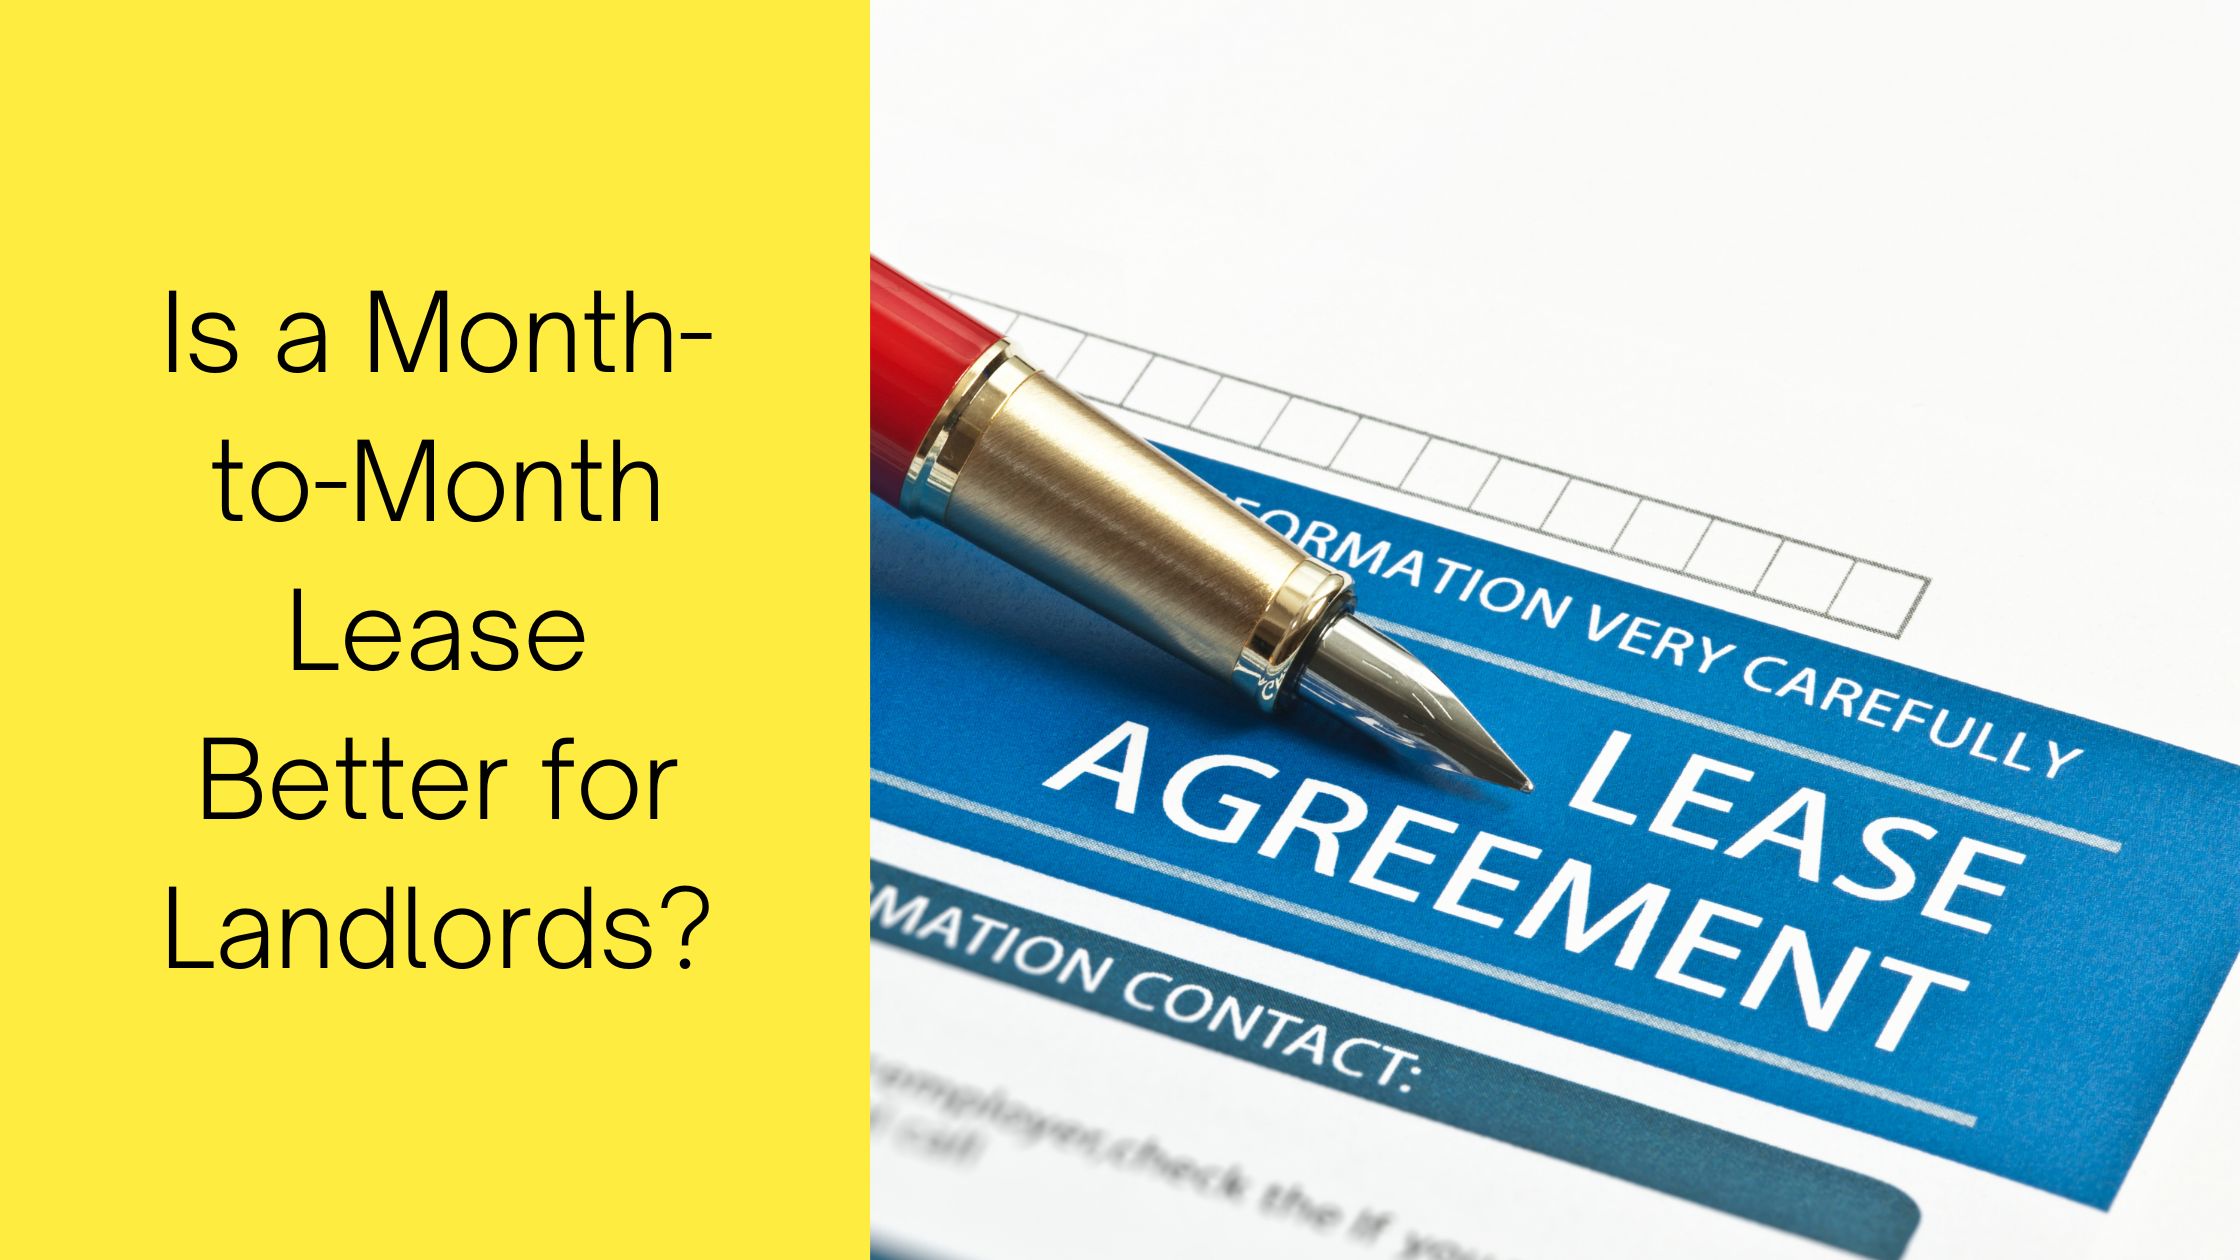 Is a Month-to-Month Lease Better for Landlords?